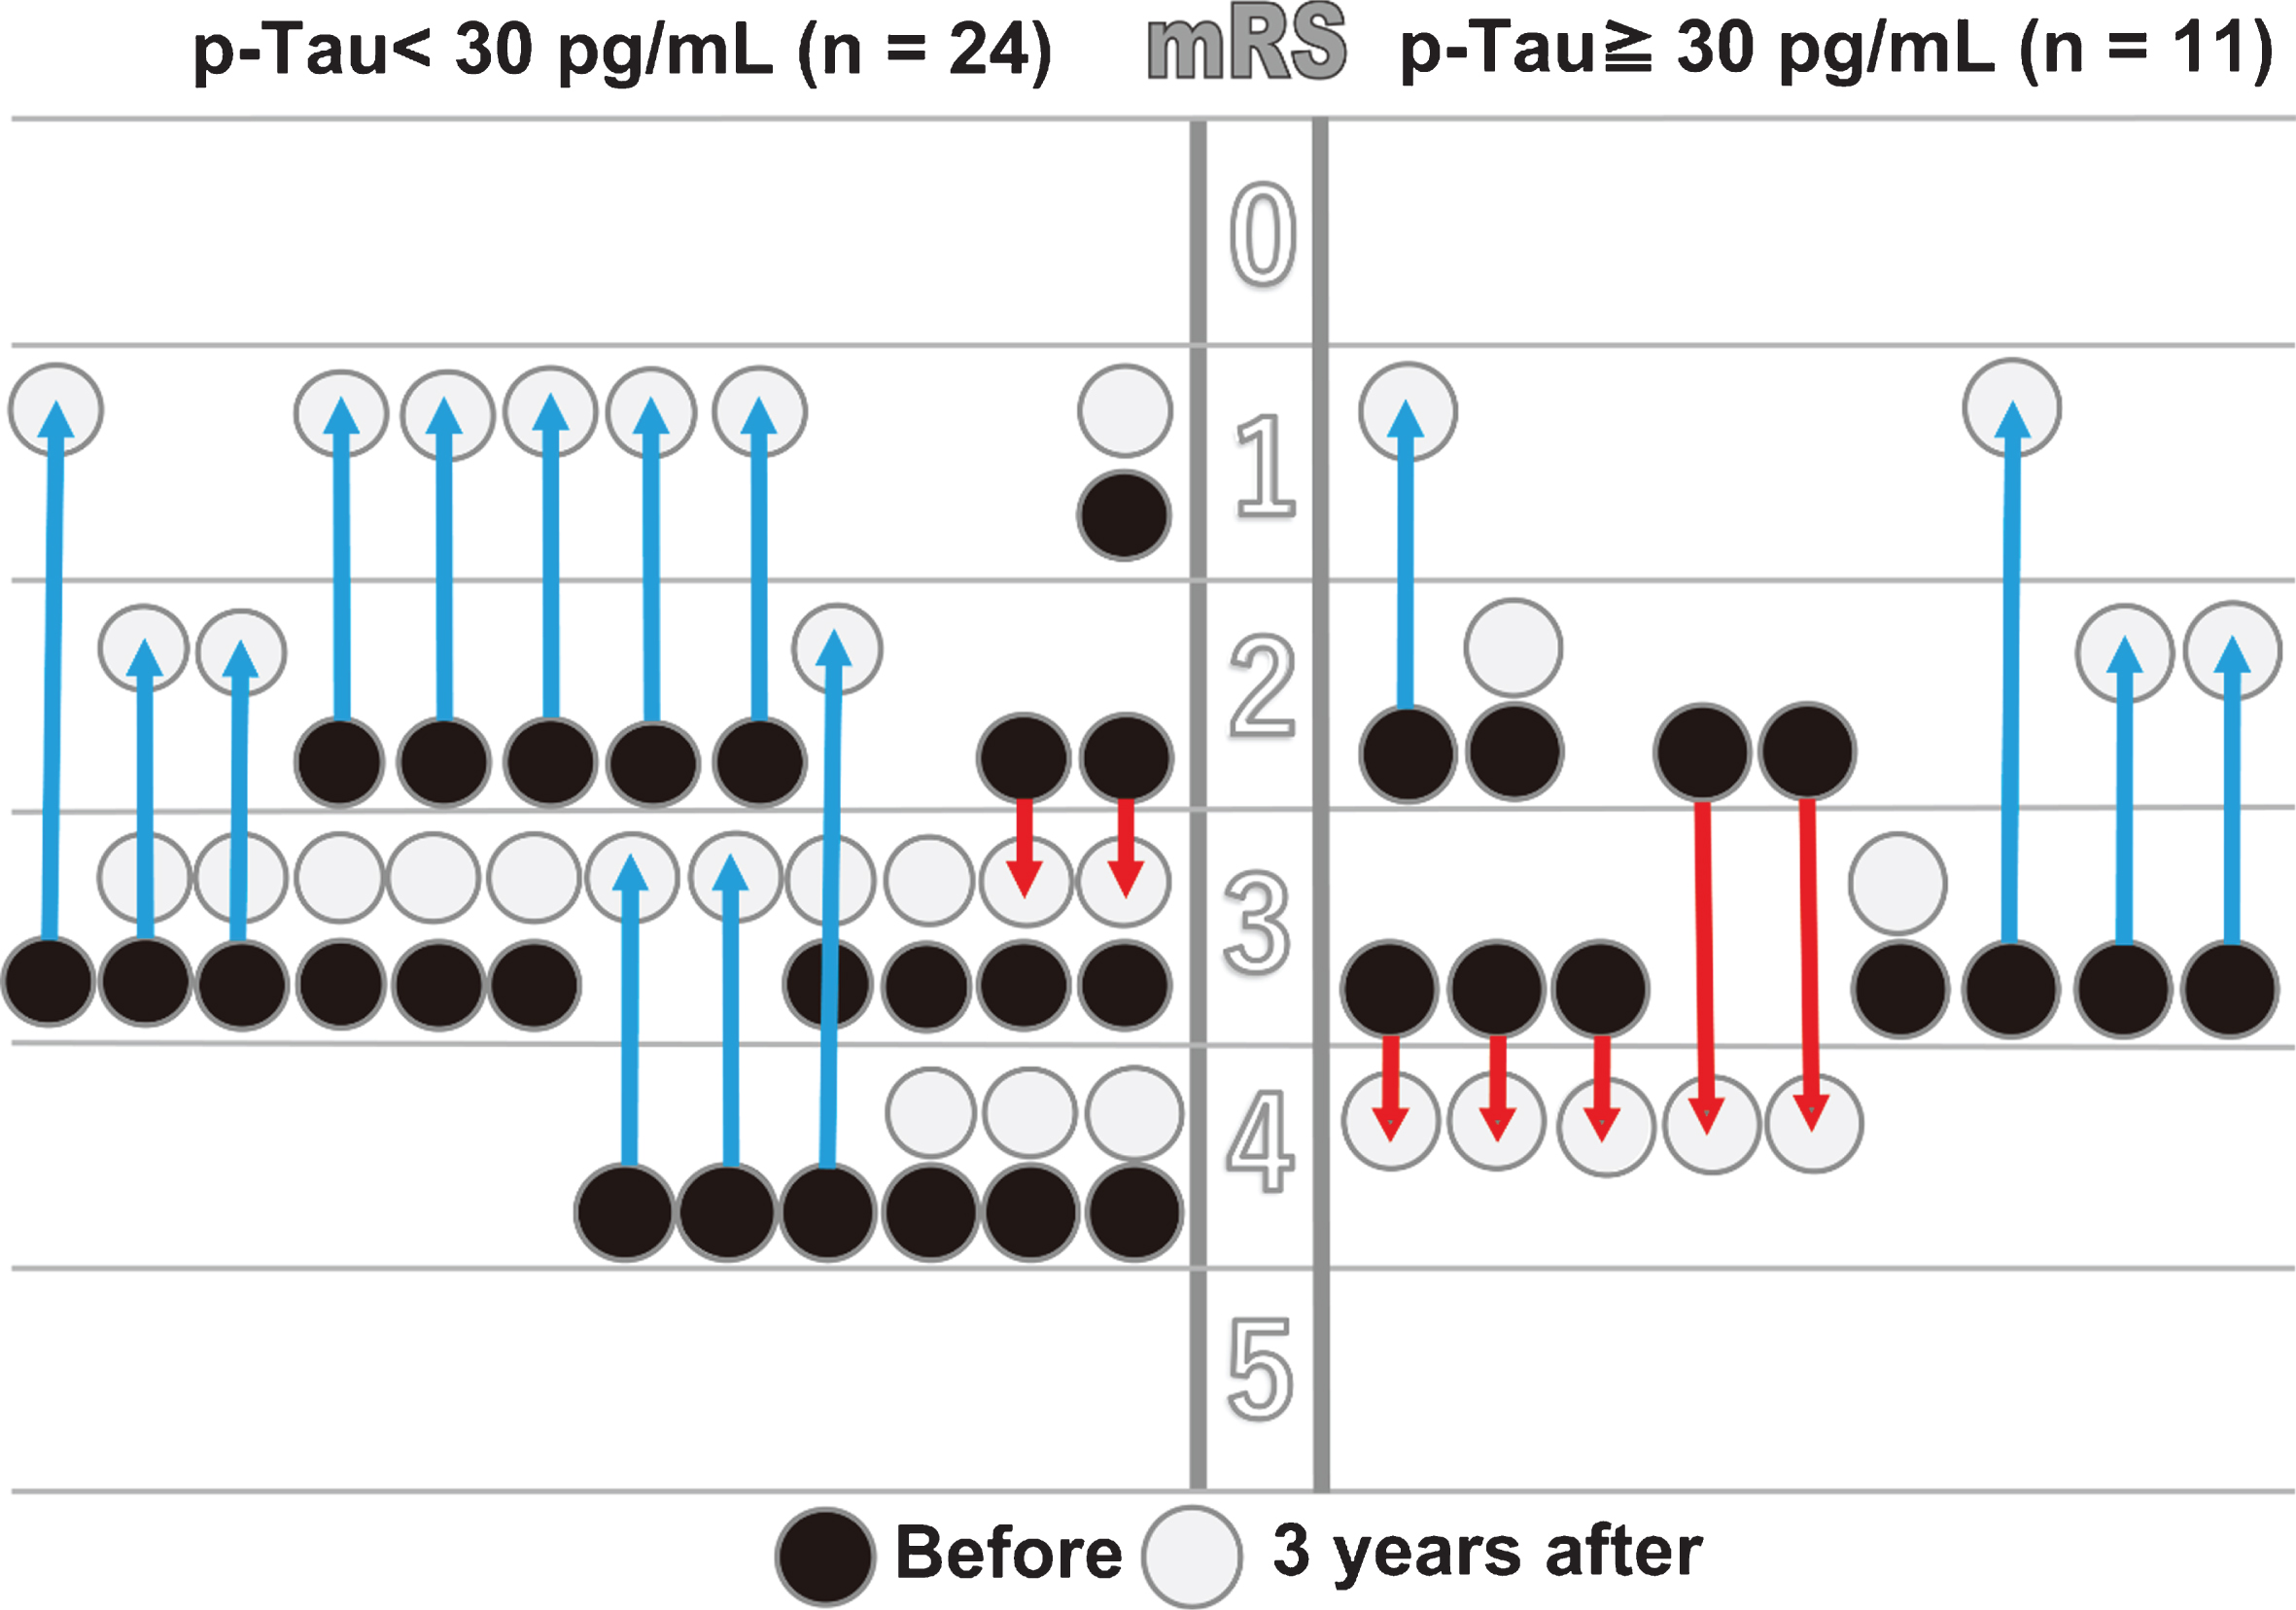 Comparison of mRS performance between the low and high p-Tau groups. Changes in the individual patients’ mRS scores from before to three years after shunt treatment are shown for the low (<30 pg/mL, n = 24) and high (≥30 pg/mL, n = 11) p-Tau groups. The arrows show individual improvements (blue) or declines (red).